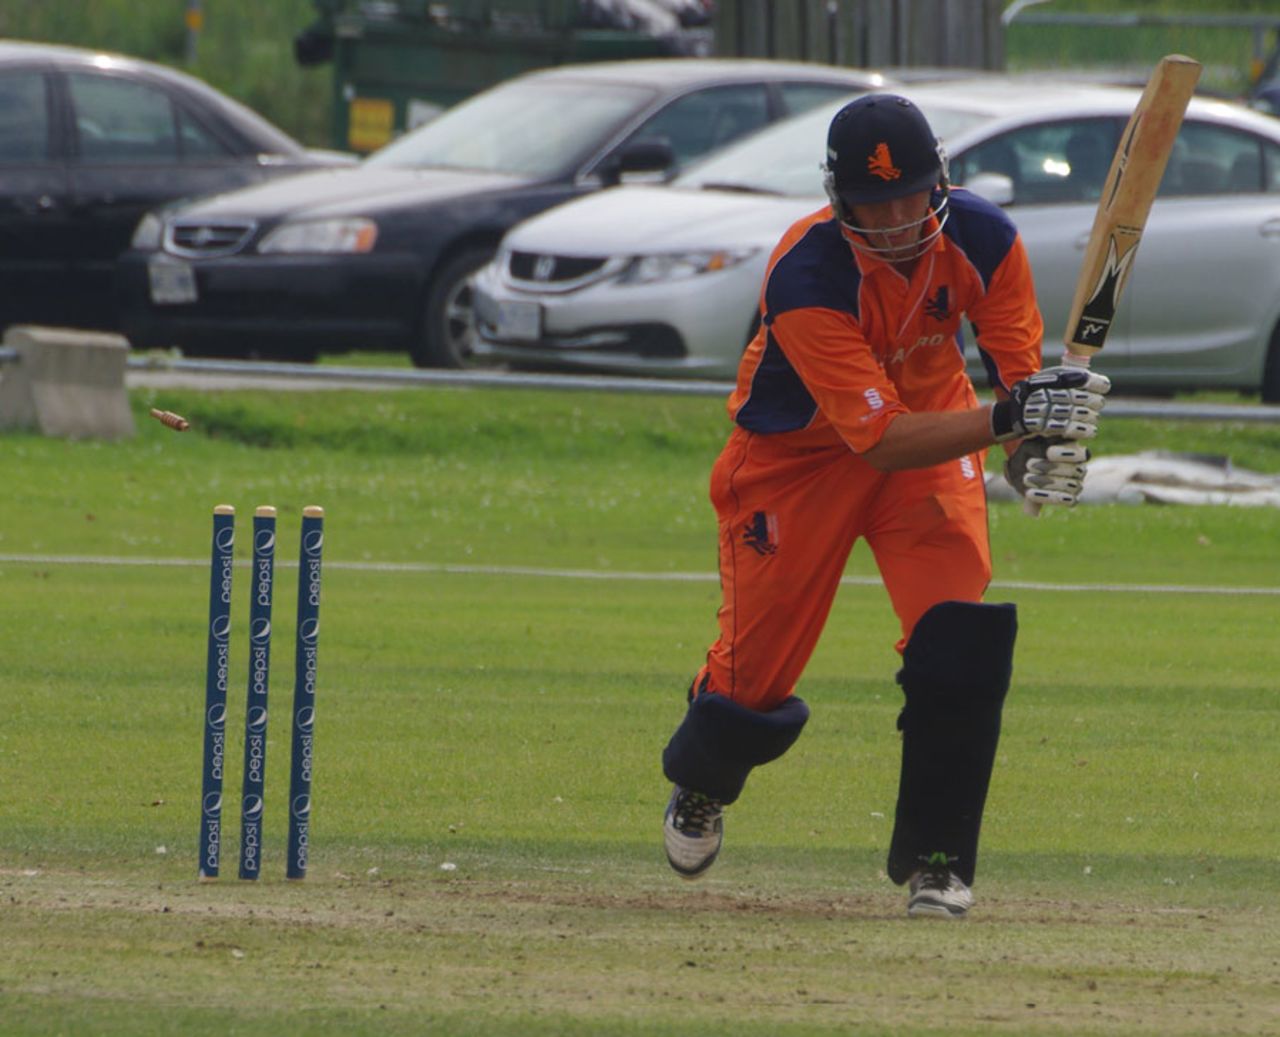 Kenneth Kamyuka castled Daan van Bunge's stumps with his first international delivery for Canada, Canada v Netherlands, ICC World Cricket League Championship,  King City, August 27, 2013